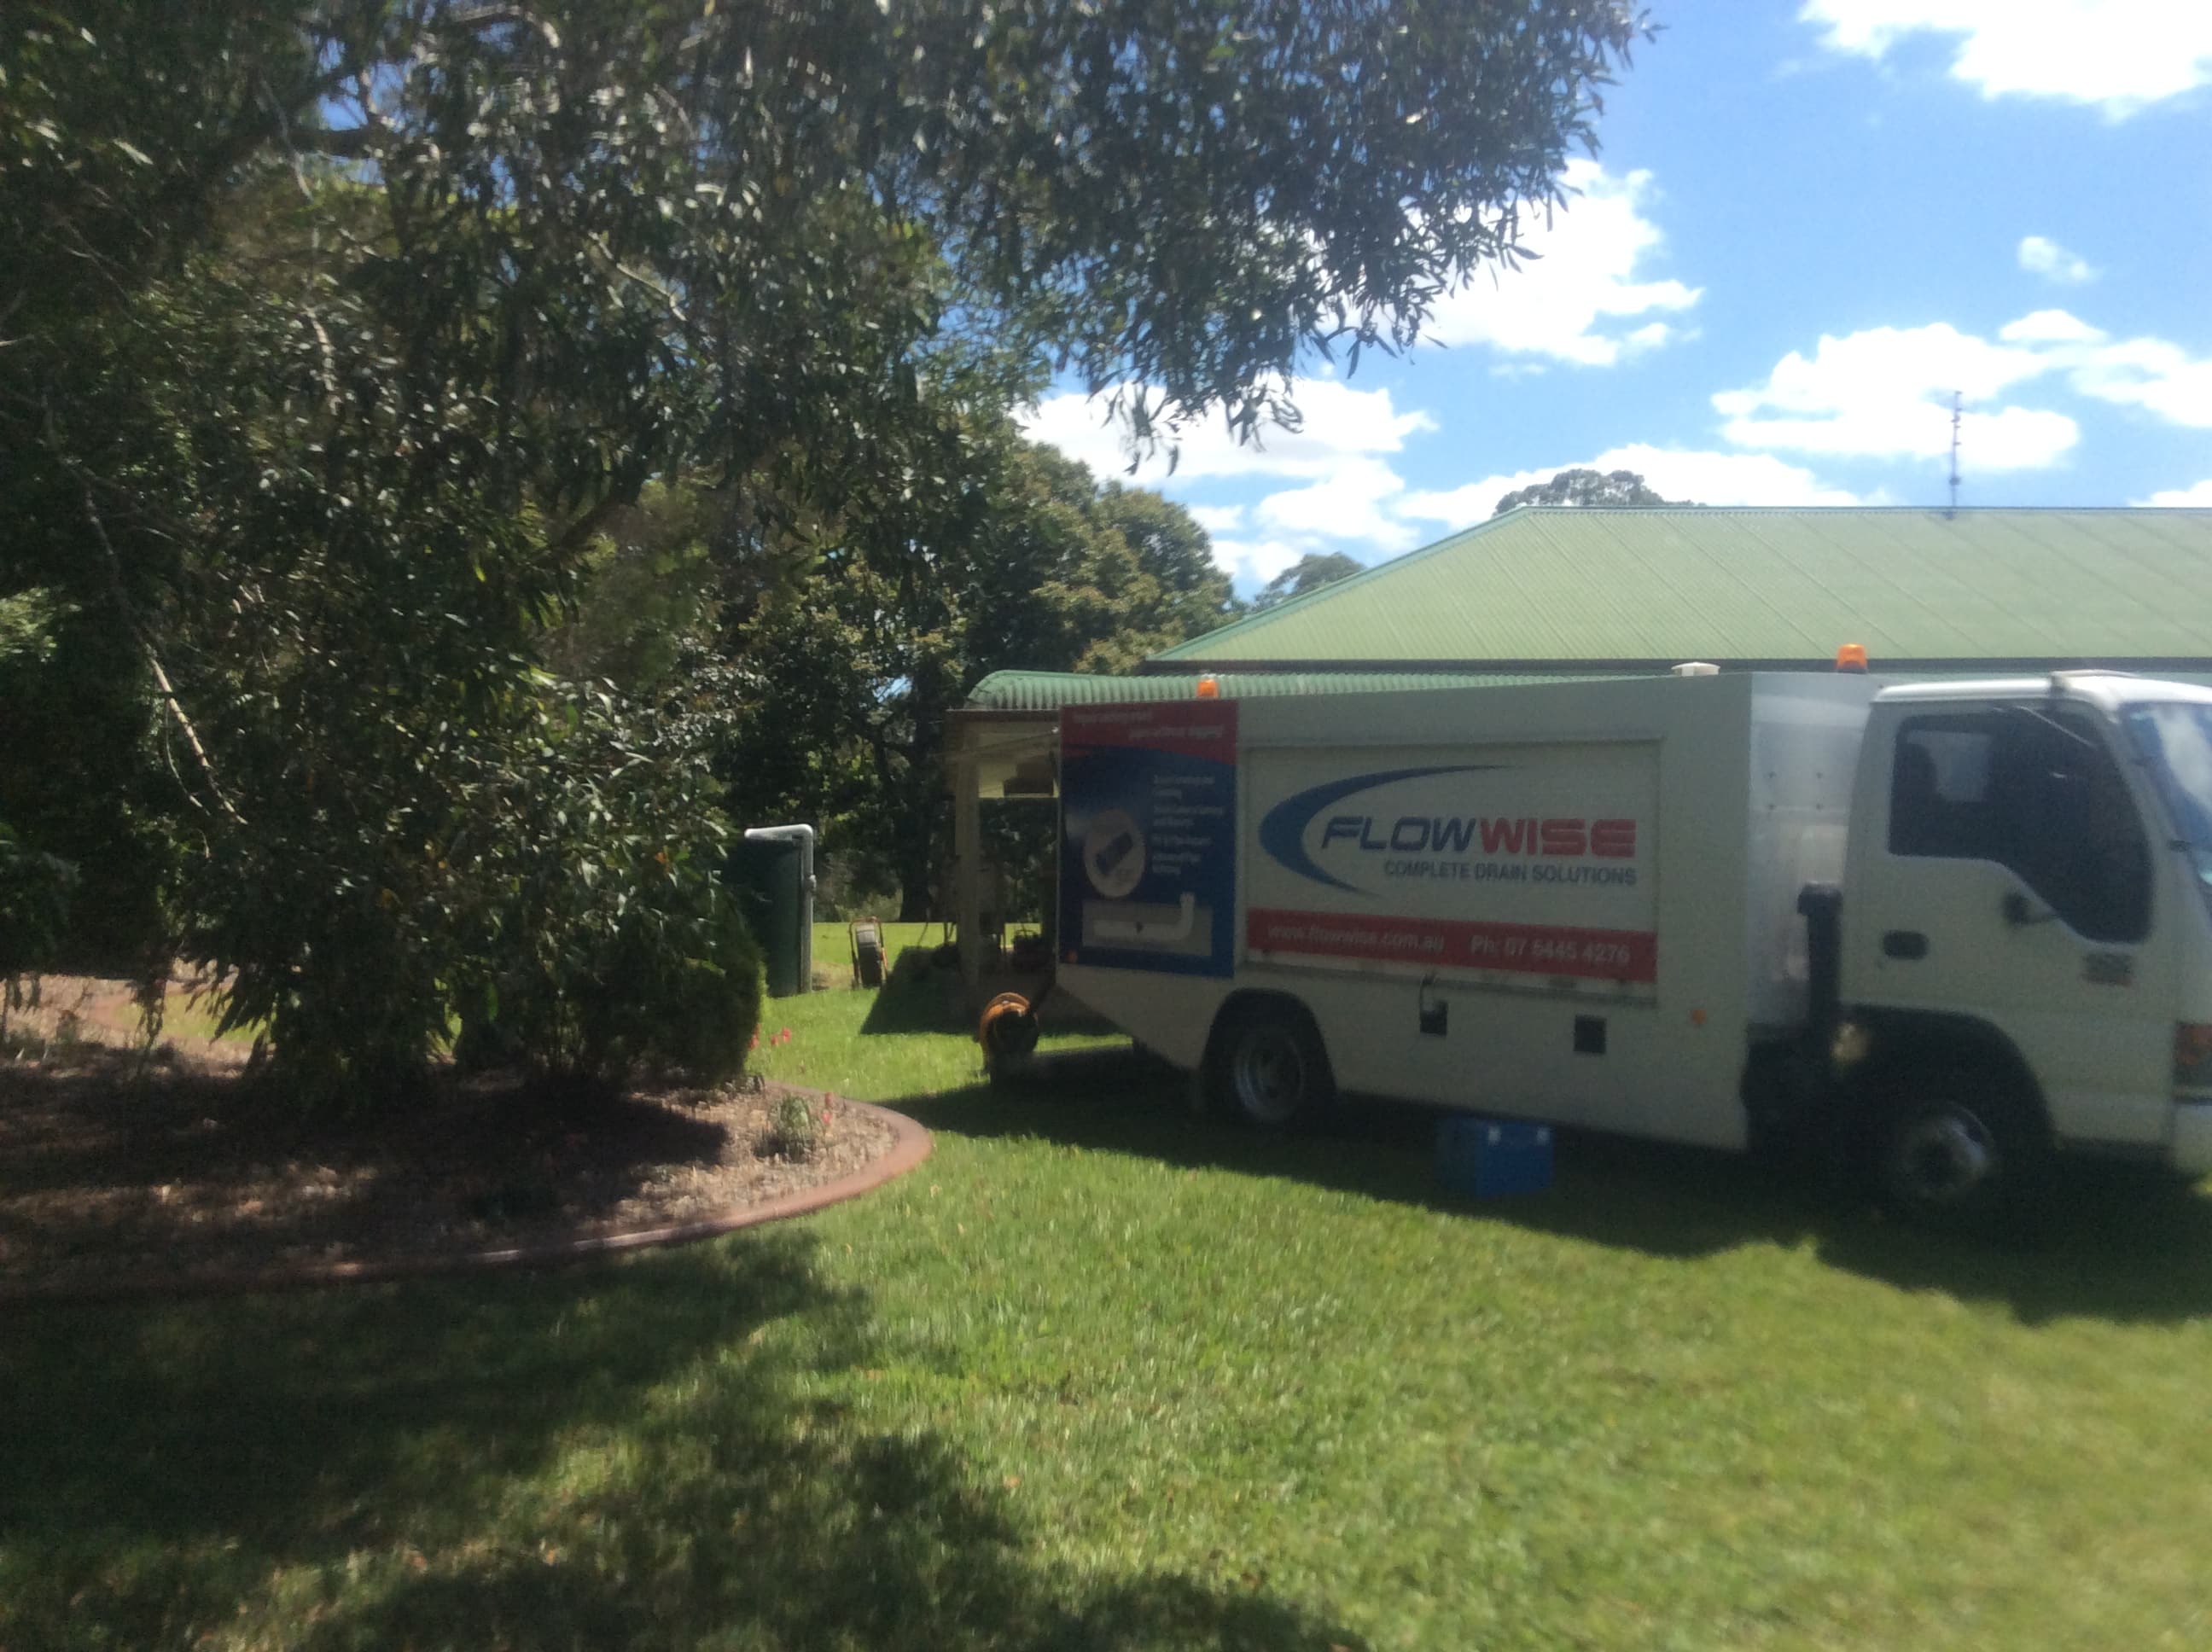 The Flowwise plumbing truck on a site on the Sunshine Coast